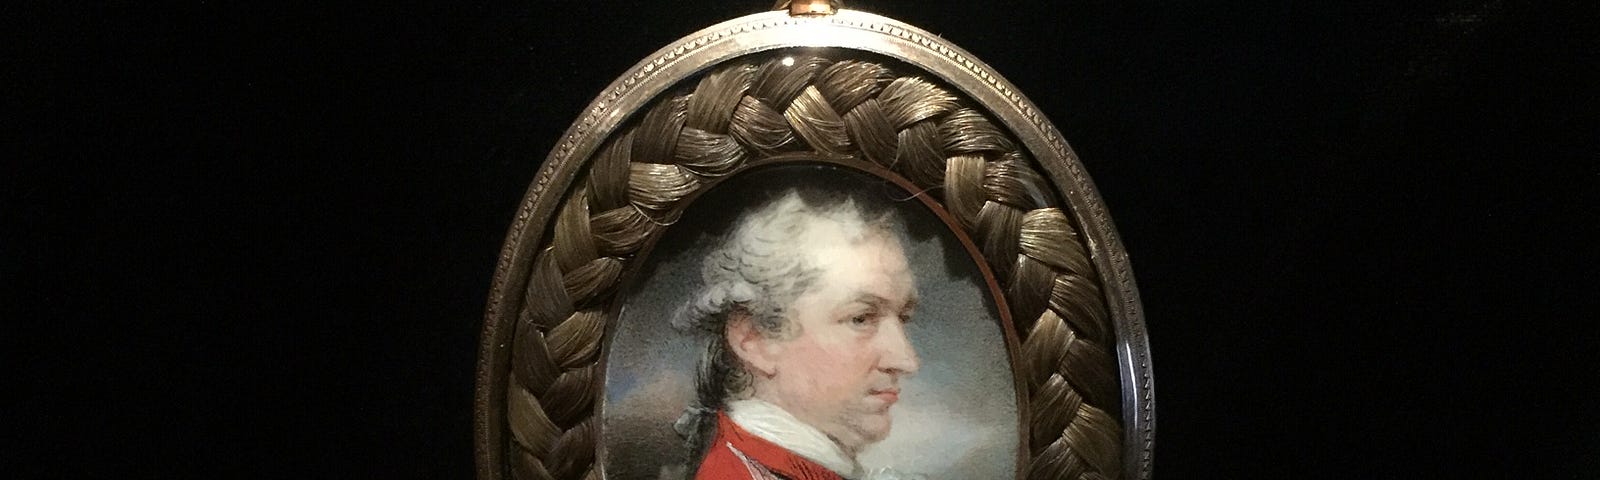 Image: John Carnac, 1786 by Ozias Humphry, Watercolour and Bodycolour on Ivory, NPG 6284 © Rania Ades